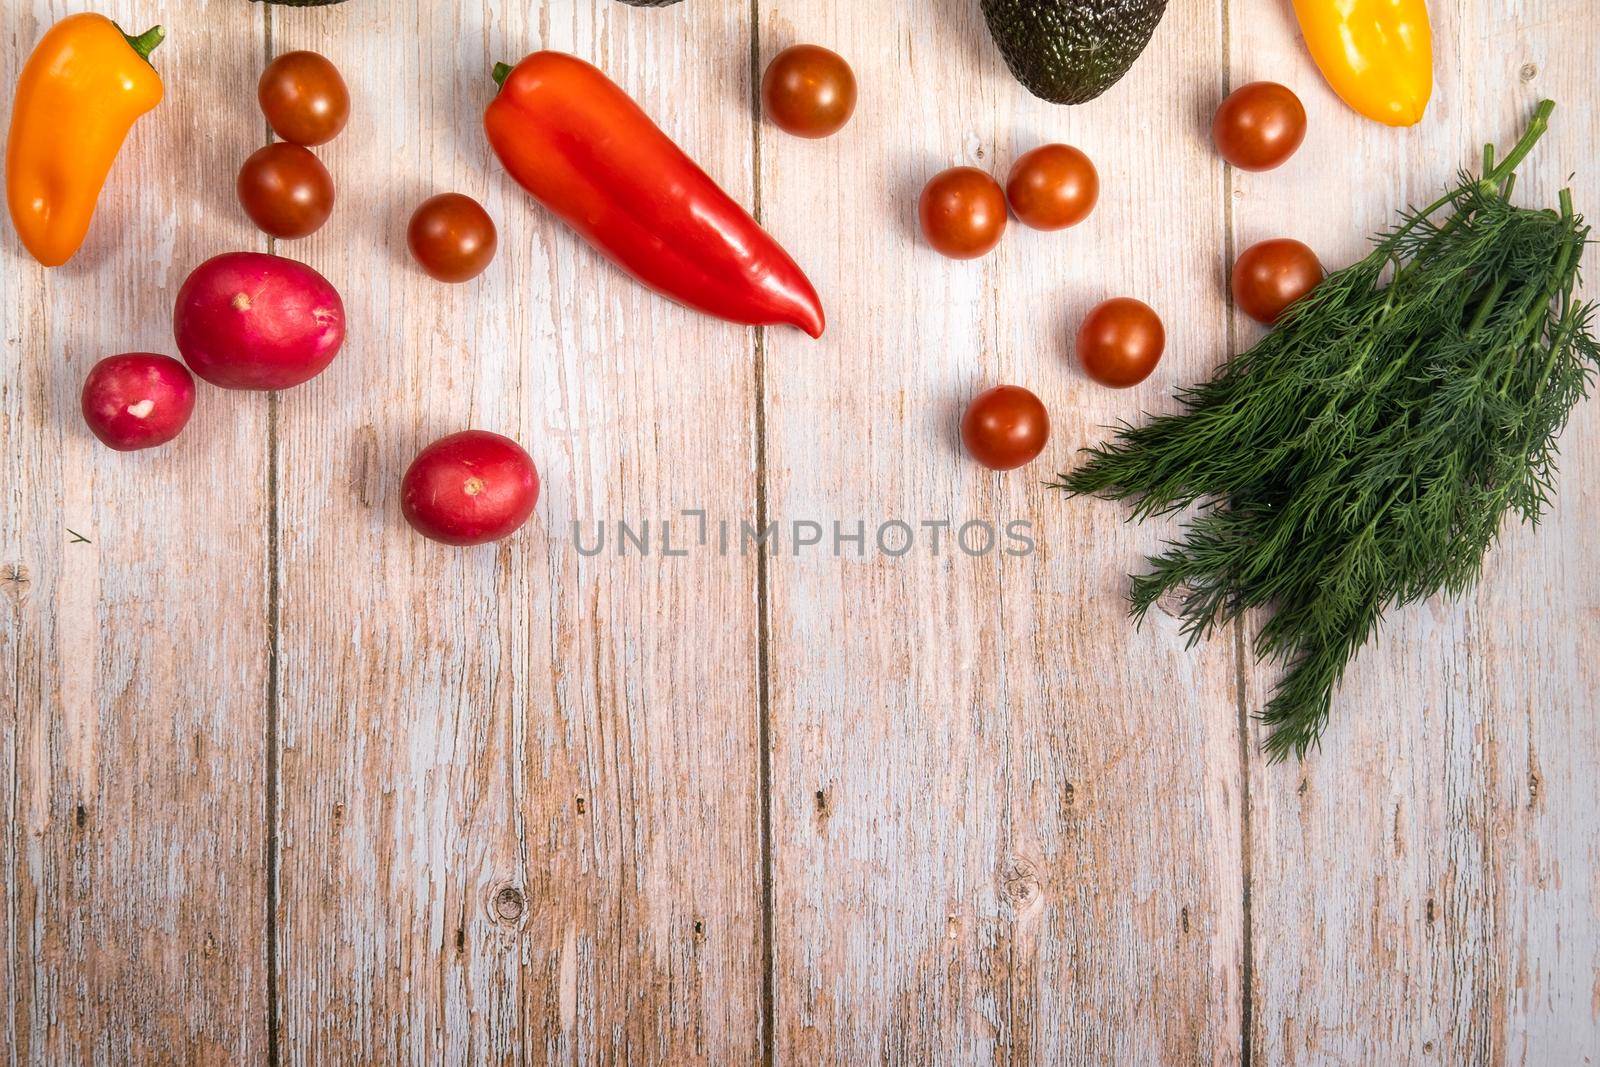 Assorted vegetables lying on a wooden table.